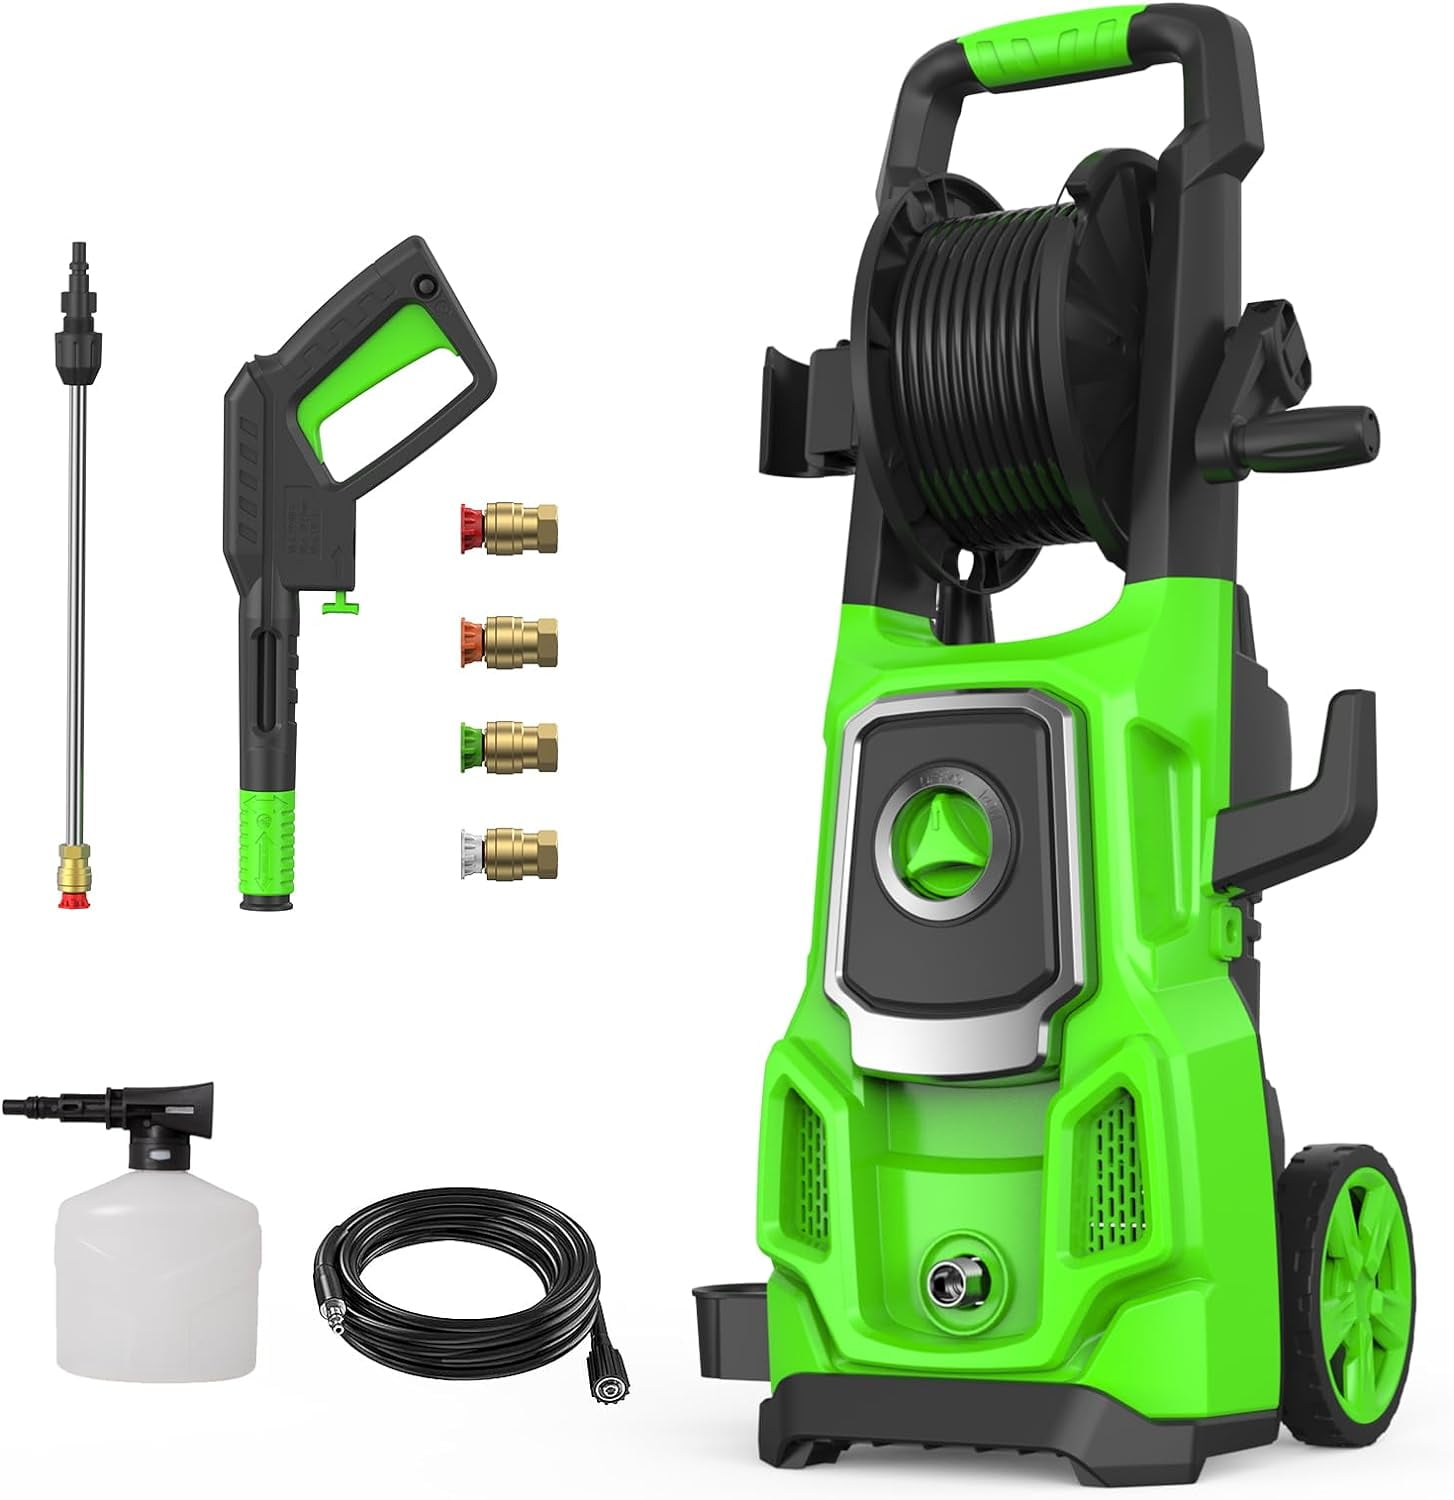 Electric Pressure Washer, 3200 Max PSI, 2.6 GPM Power Washer Machine with  Hose Reel,4 Quick Connect Nozzles, Foam Cannon, for Cars, Patios, and Floor